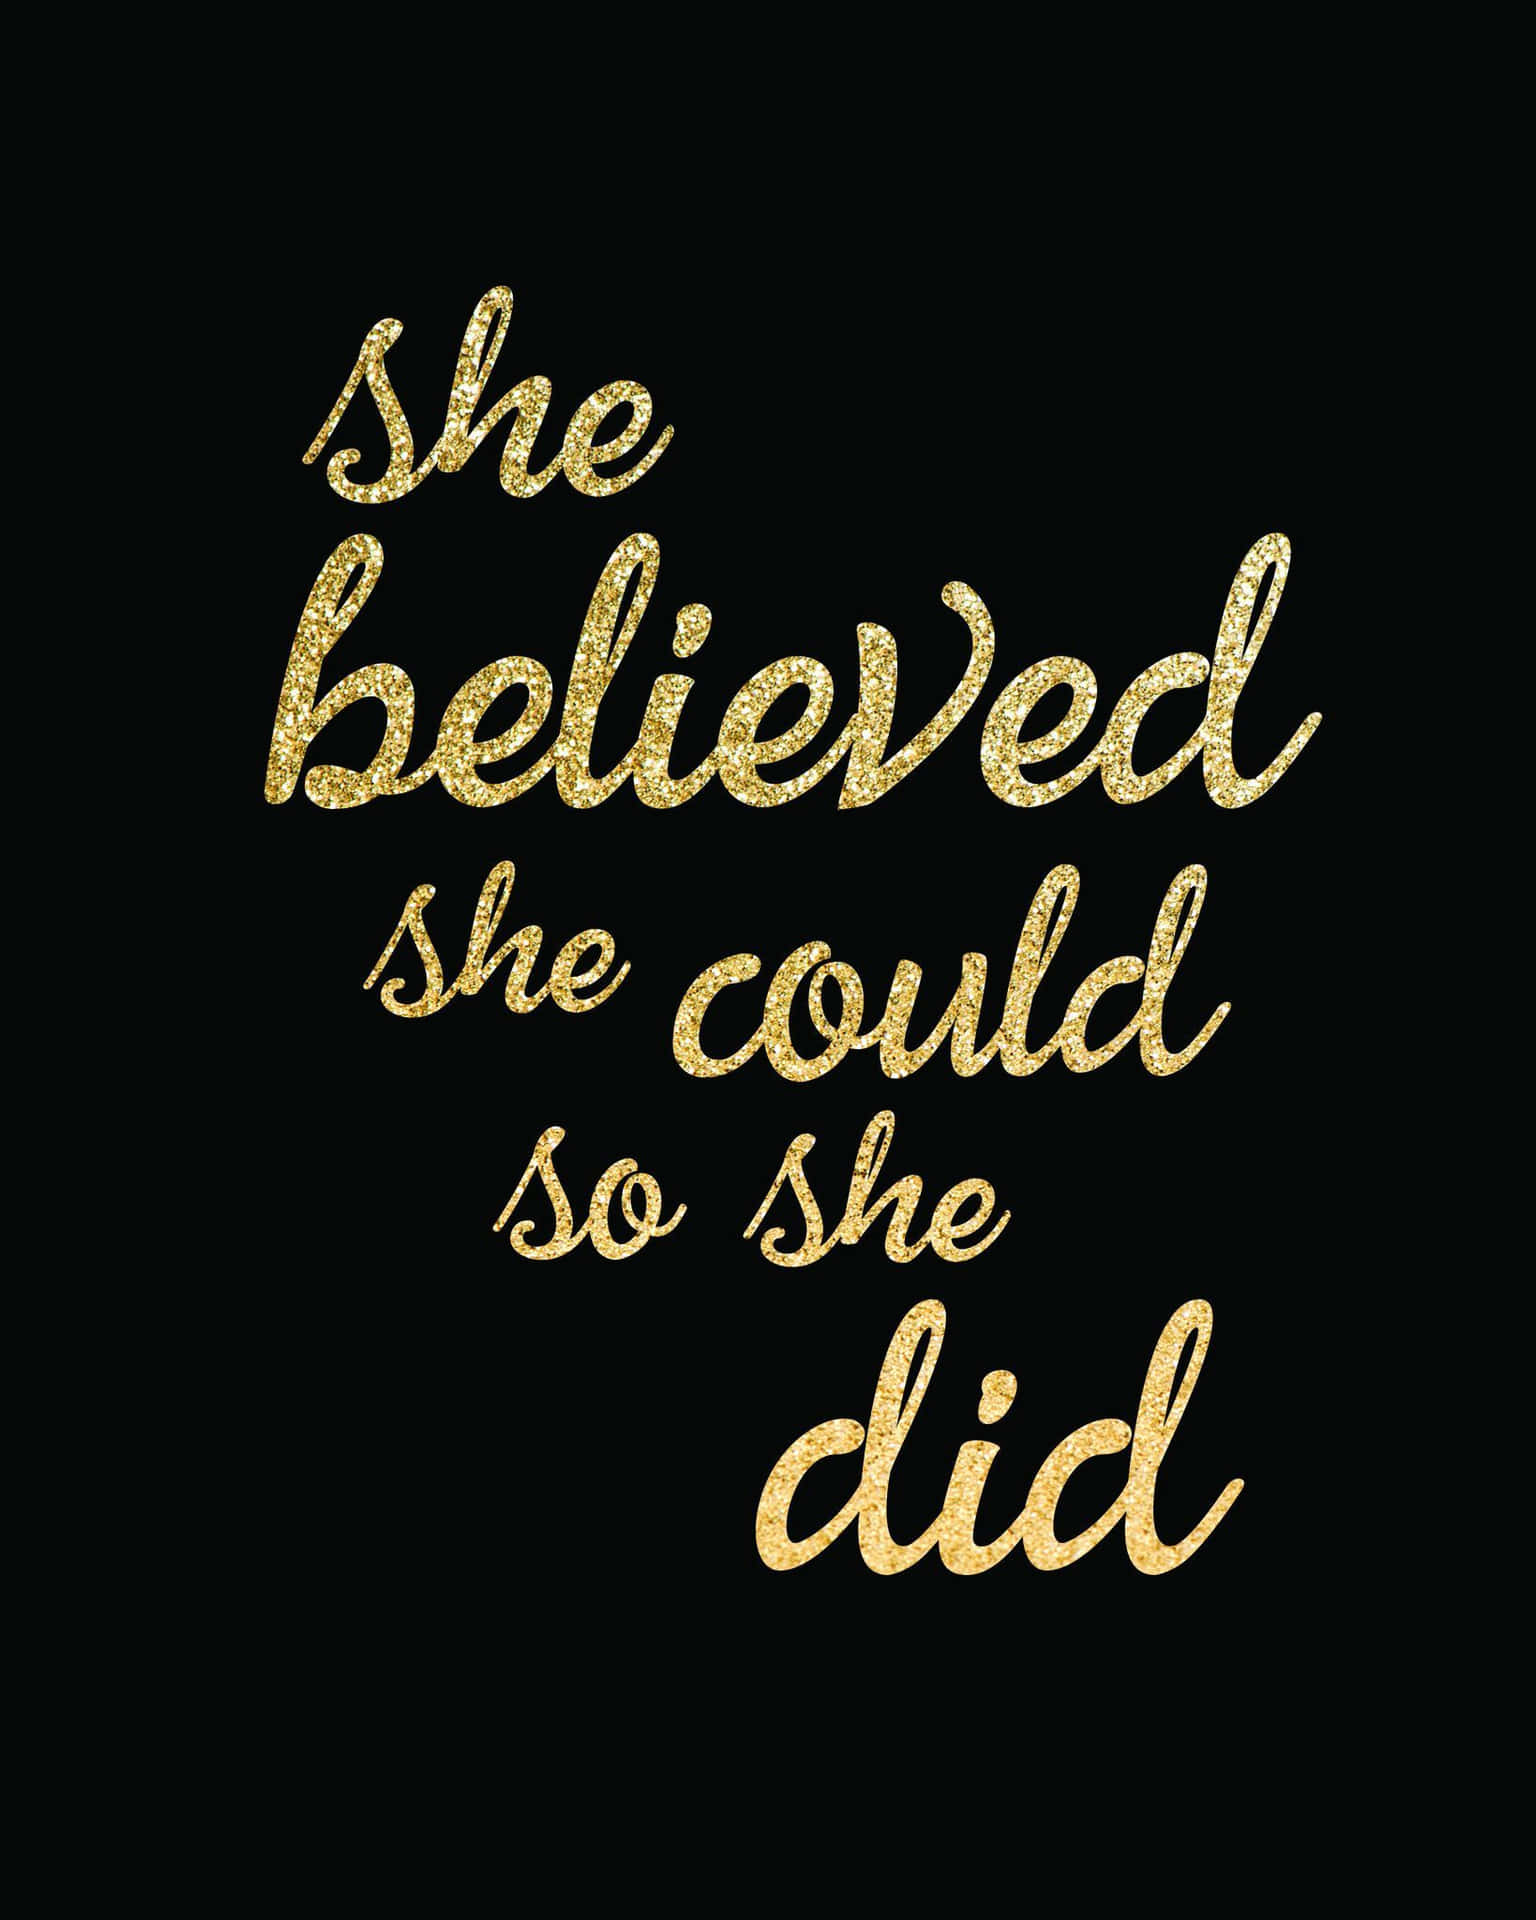 She believed she could, so she did. Wallpaper